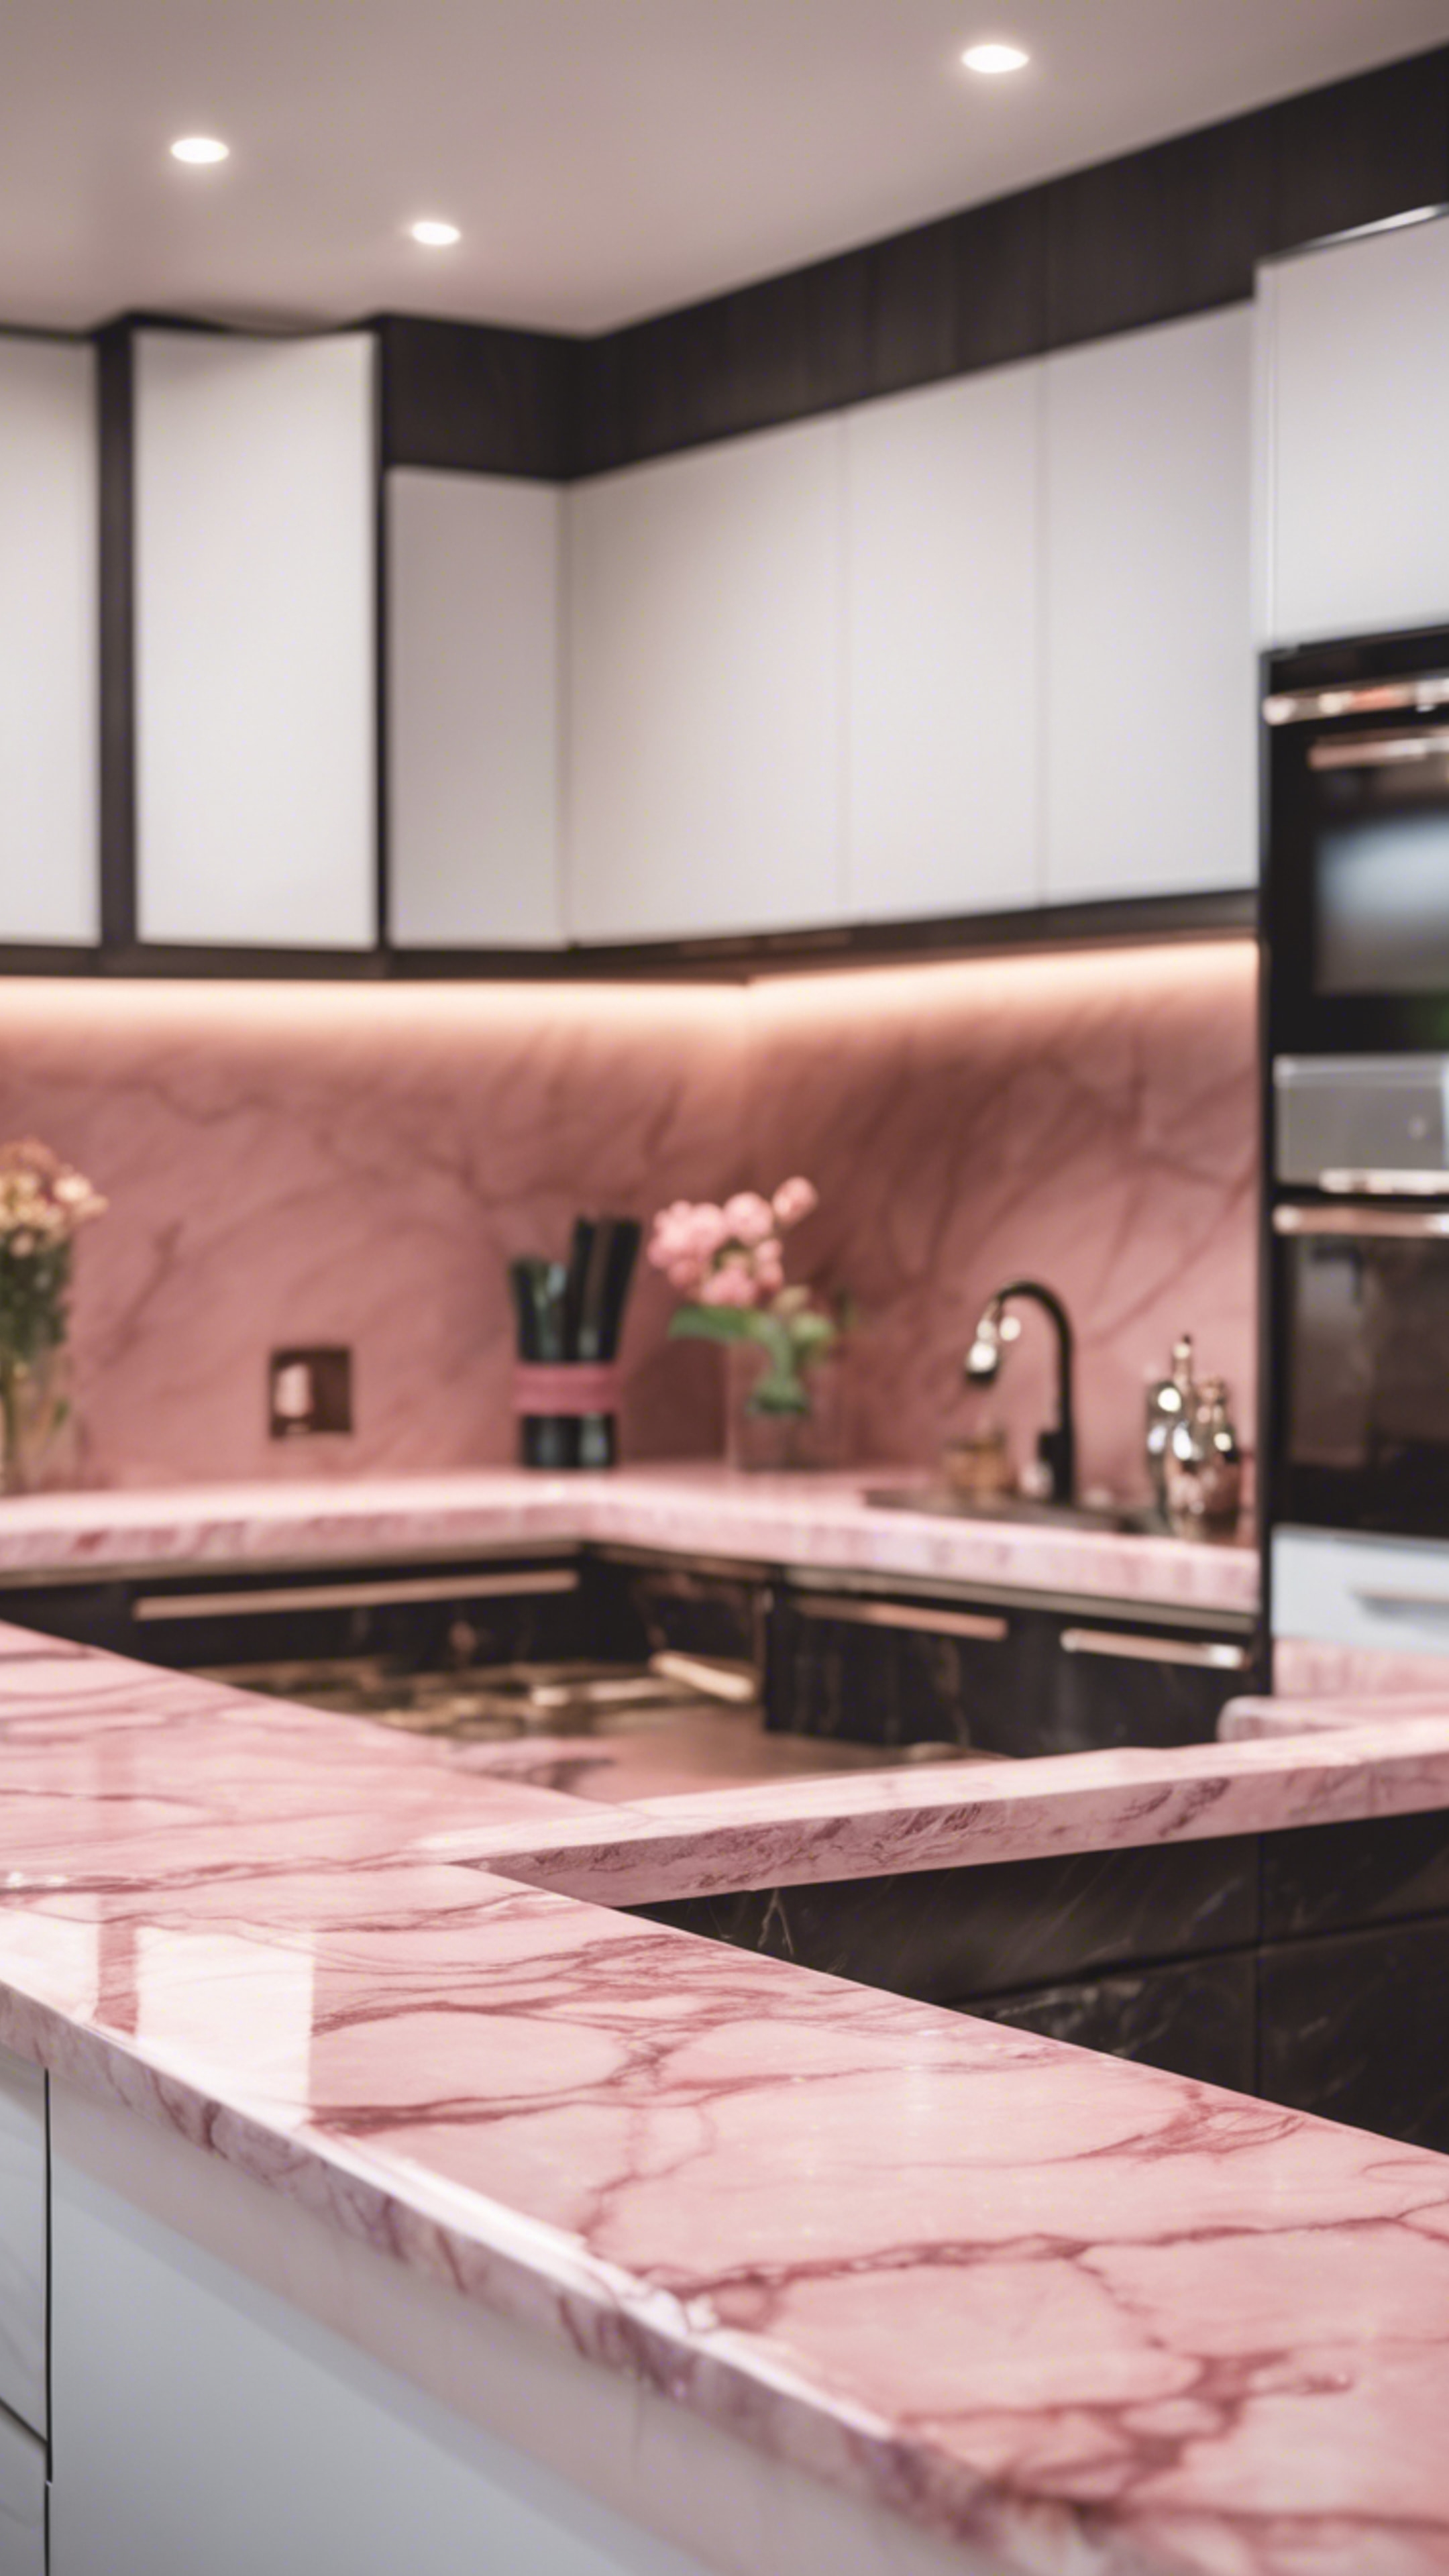 A rosy pink marble countertop sparkling in a modern kitchen. Hình nền[be2142cfde9545daae7b]